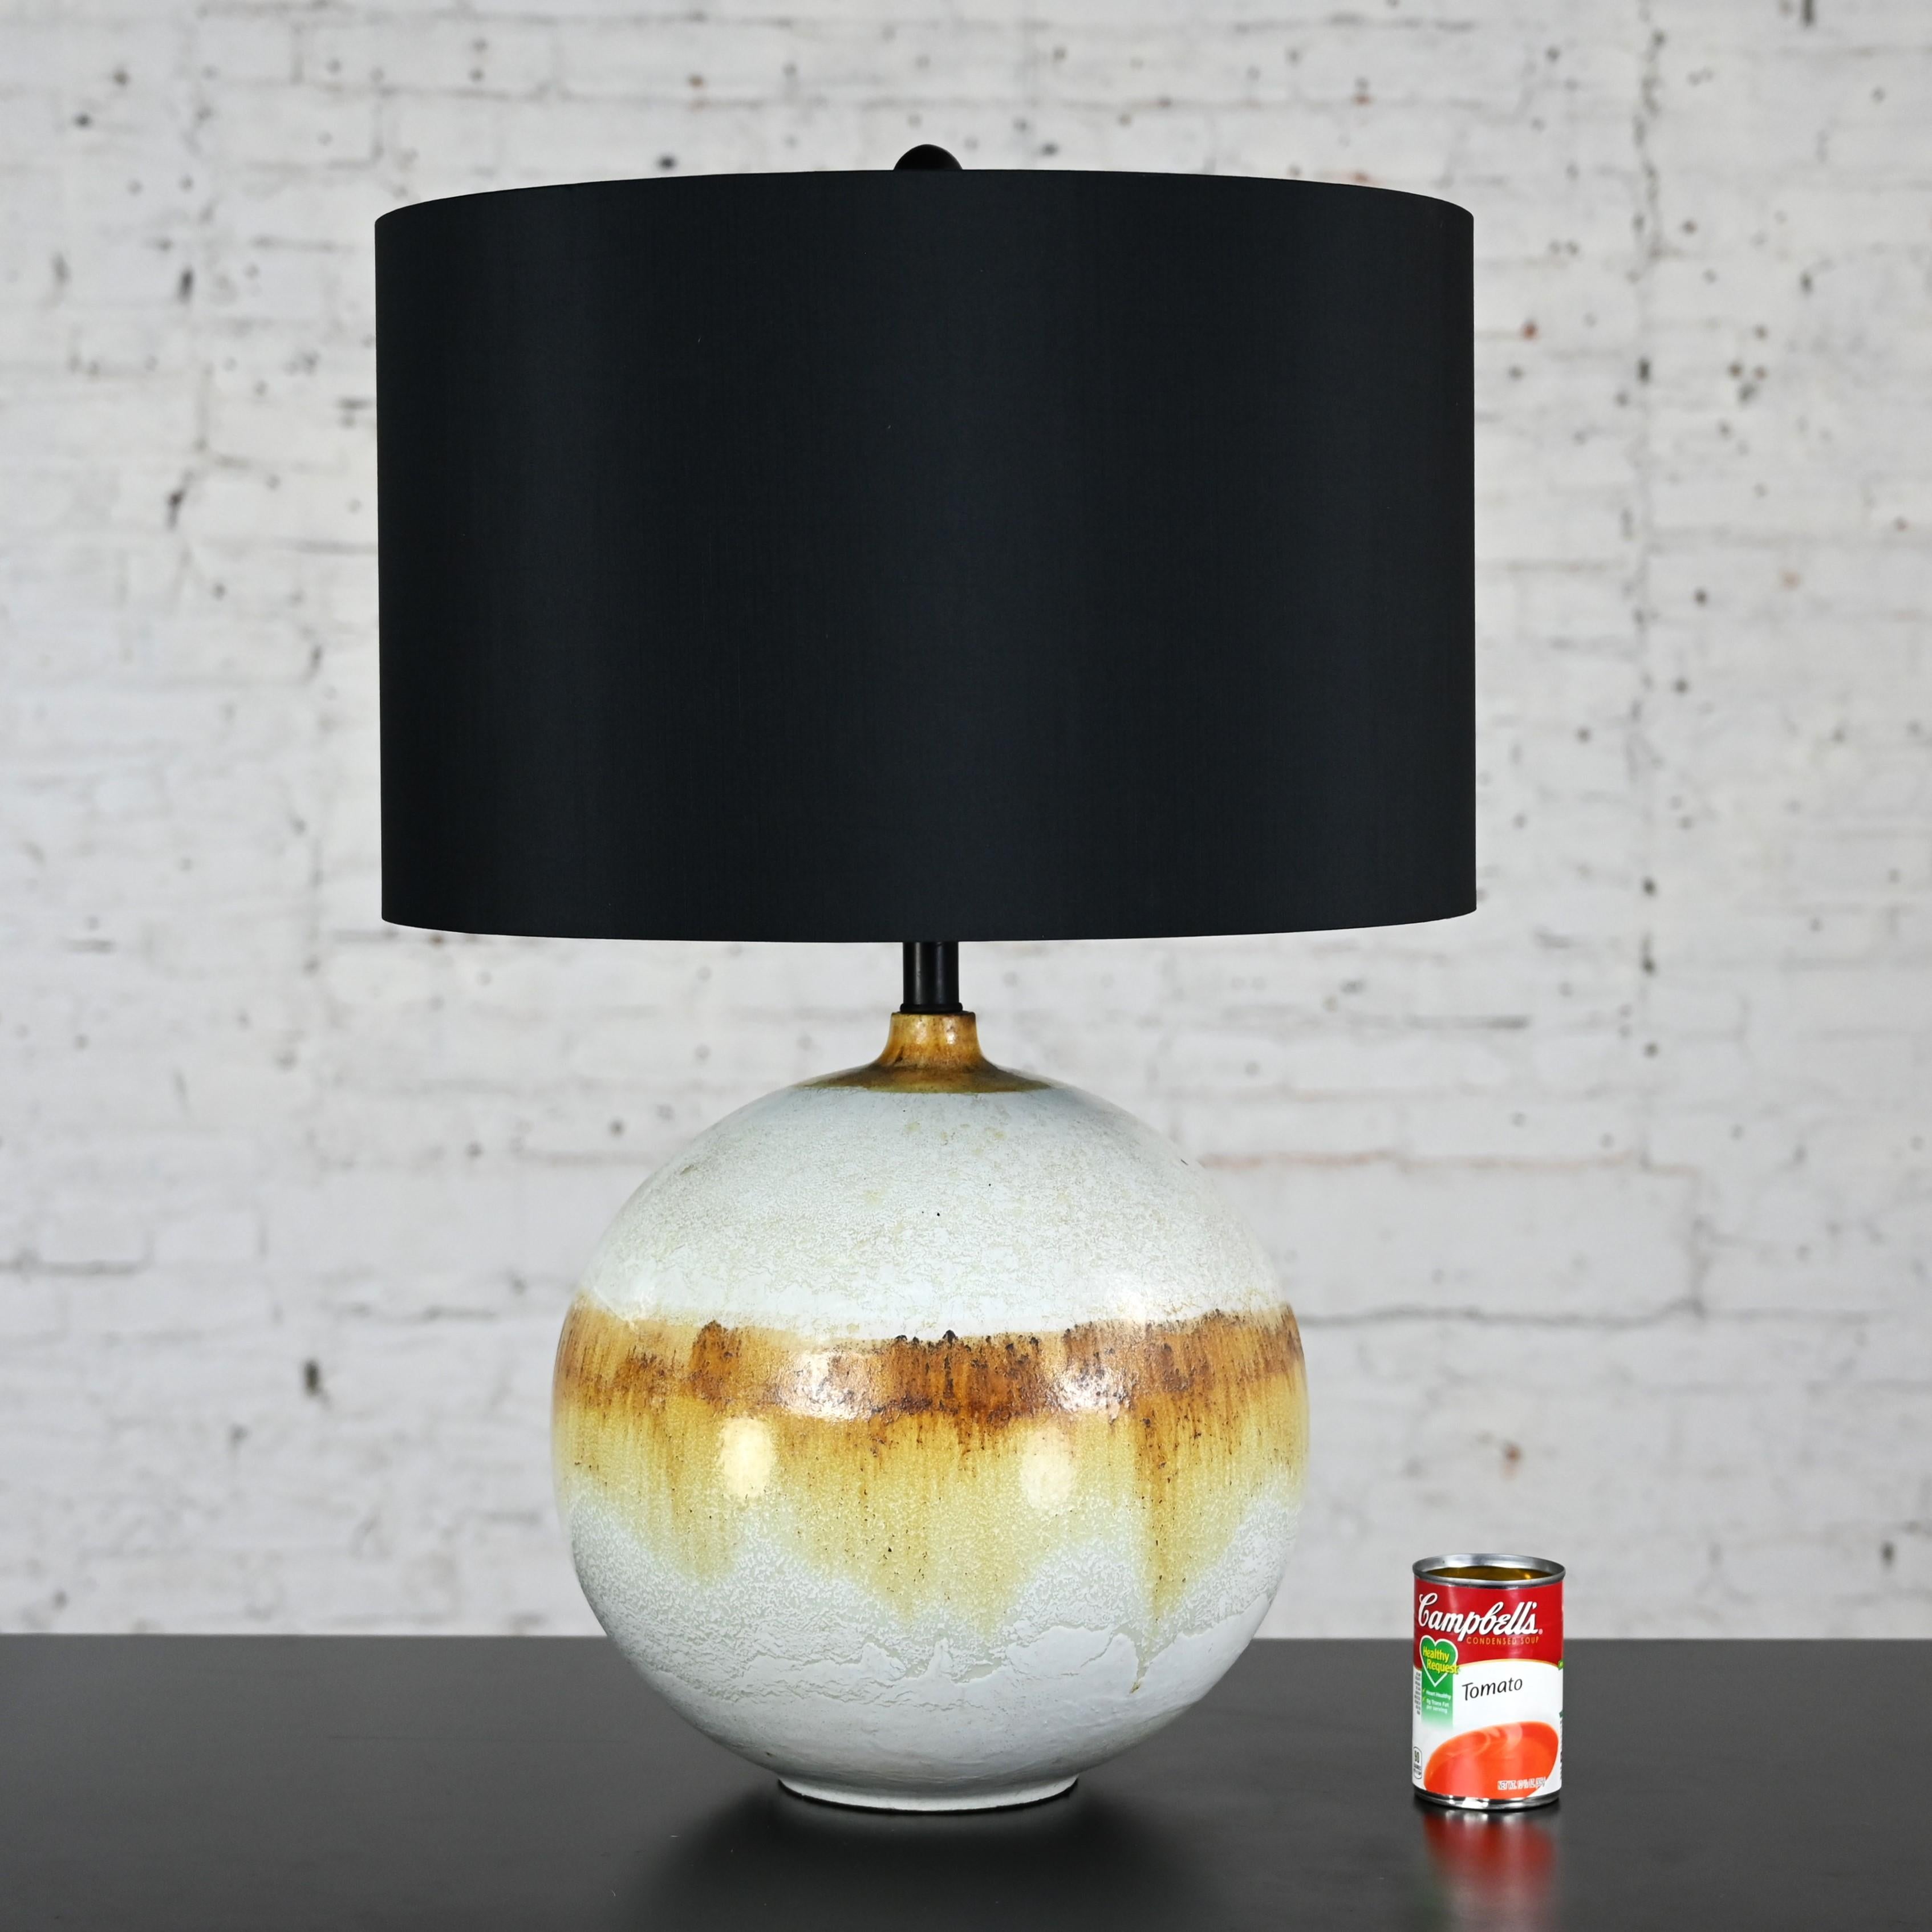 Mid-20th Century MCM Drip Glaze Ceramic Ball Lamp with New Black Shade For Sale 4